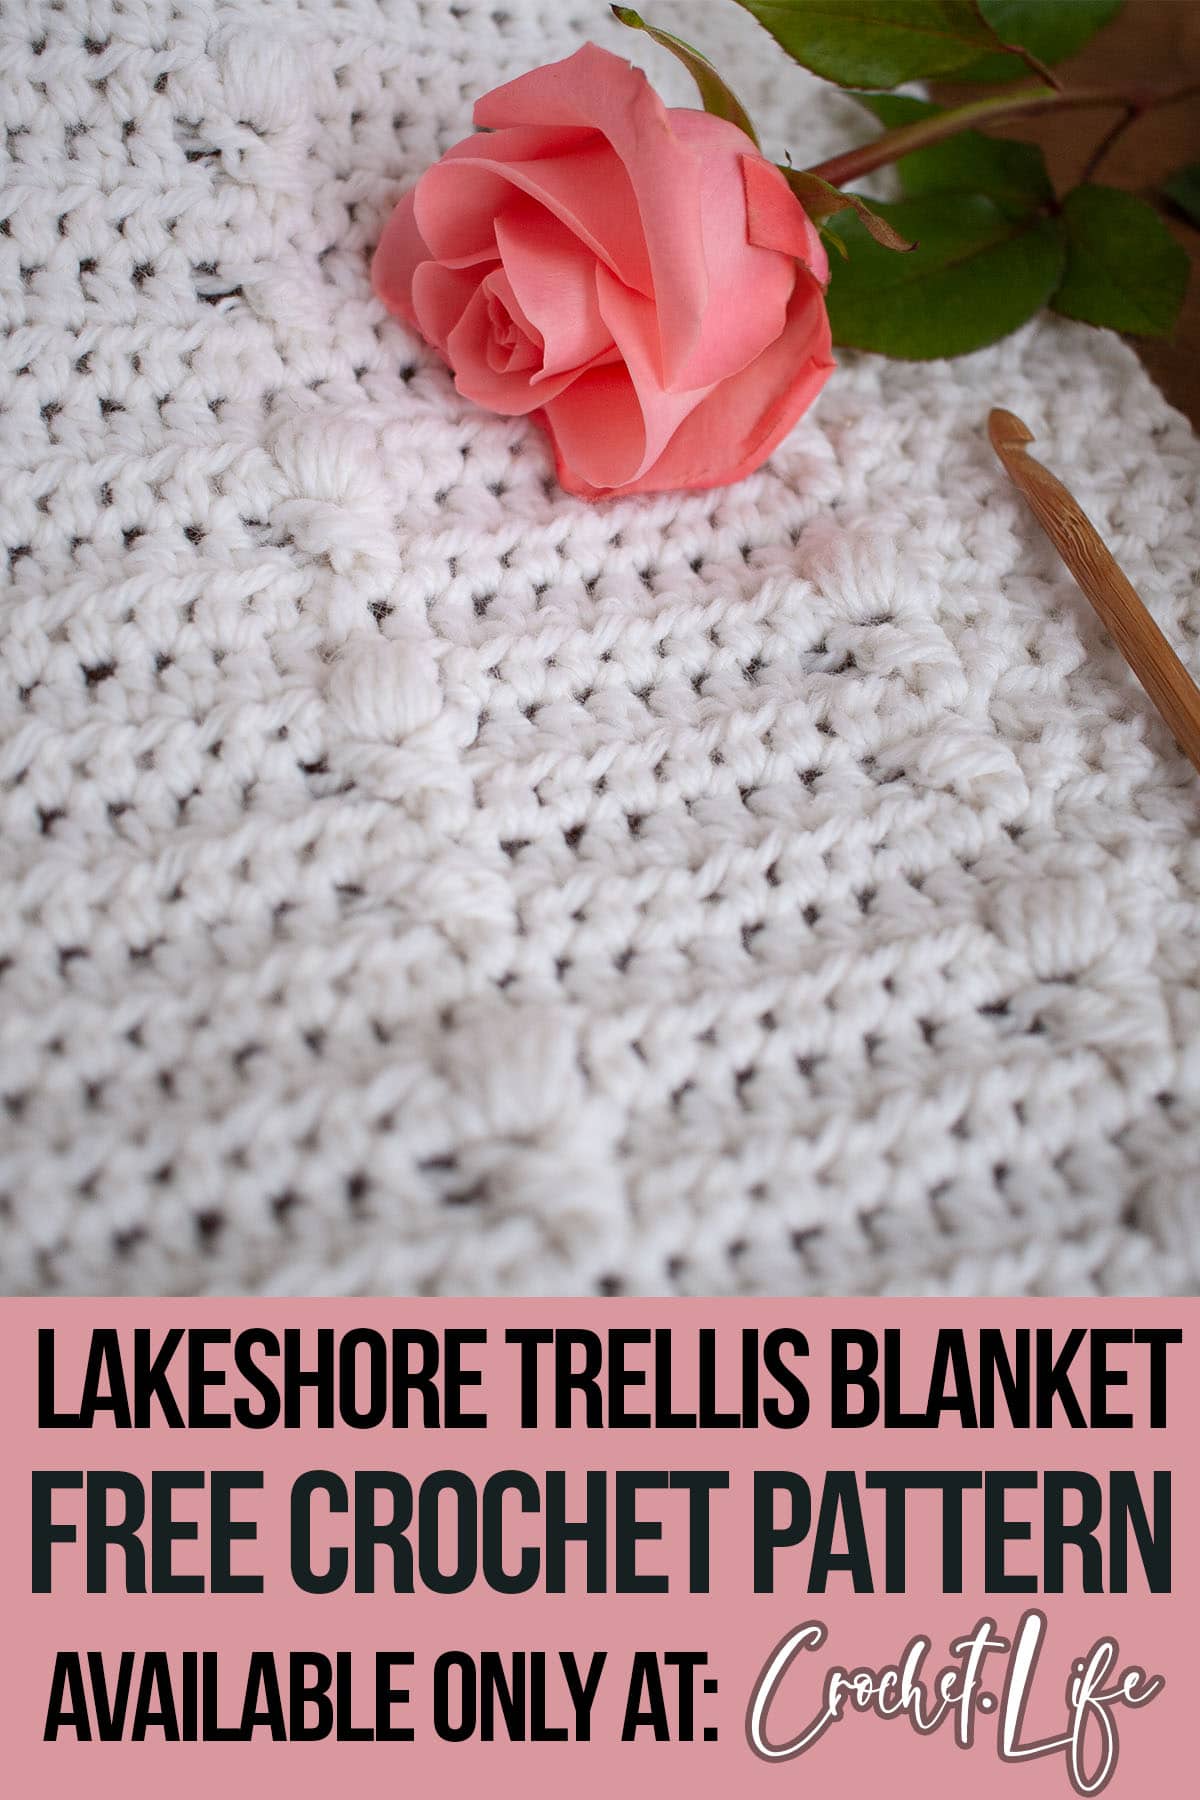 crochet baby blanket pattern with text which reads lakeshore trellis blanket free crochet pattern available only at crochet.life